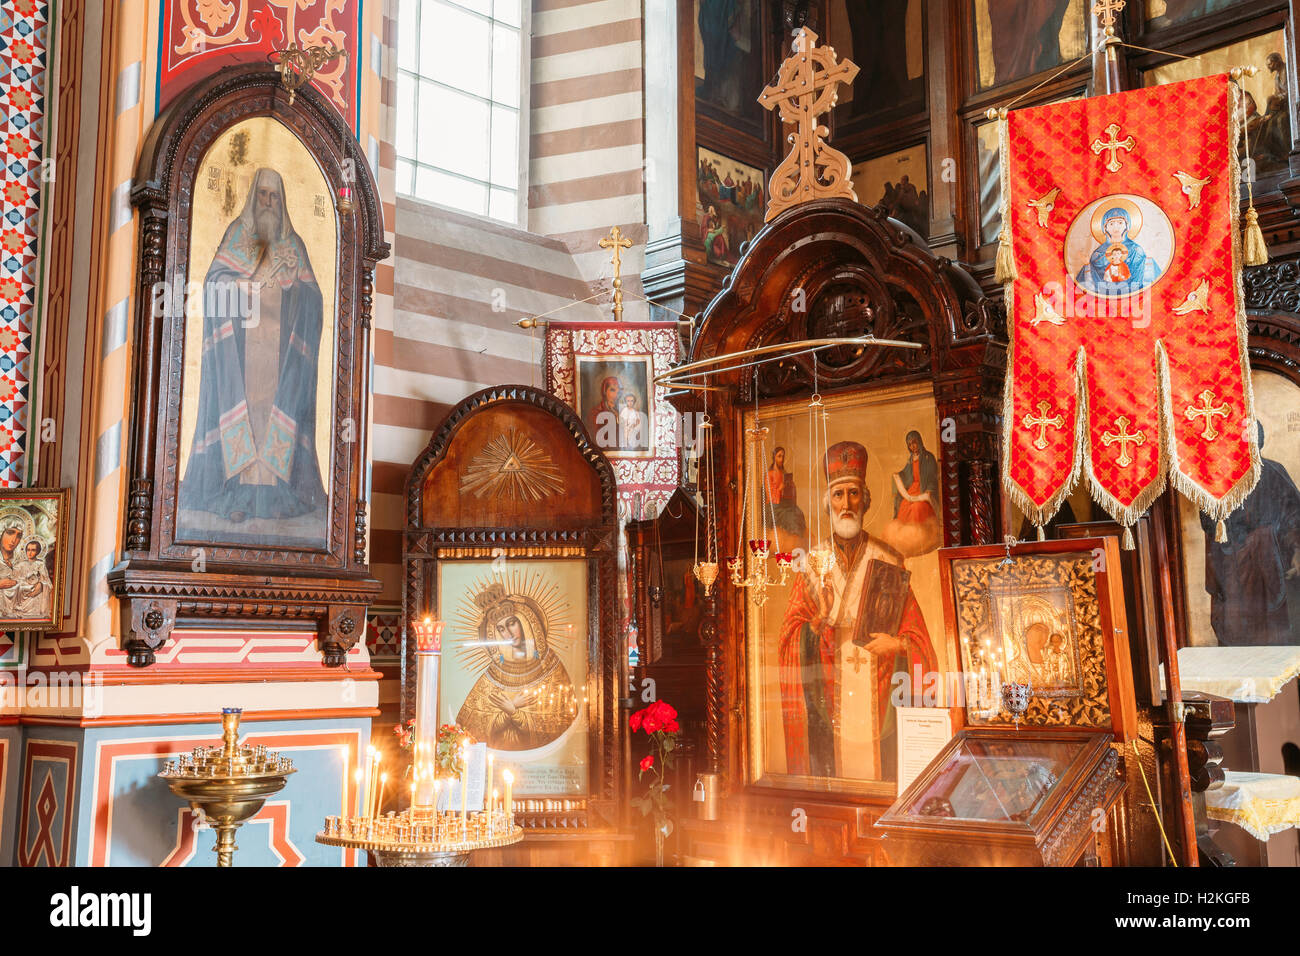 Vilnius, Lithuania - July 04, 2016: Close The Left Side Of Iconostasis In Christian Orthodox Church Of Saint Nicholas. Stock Photo